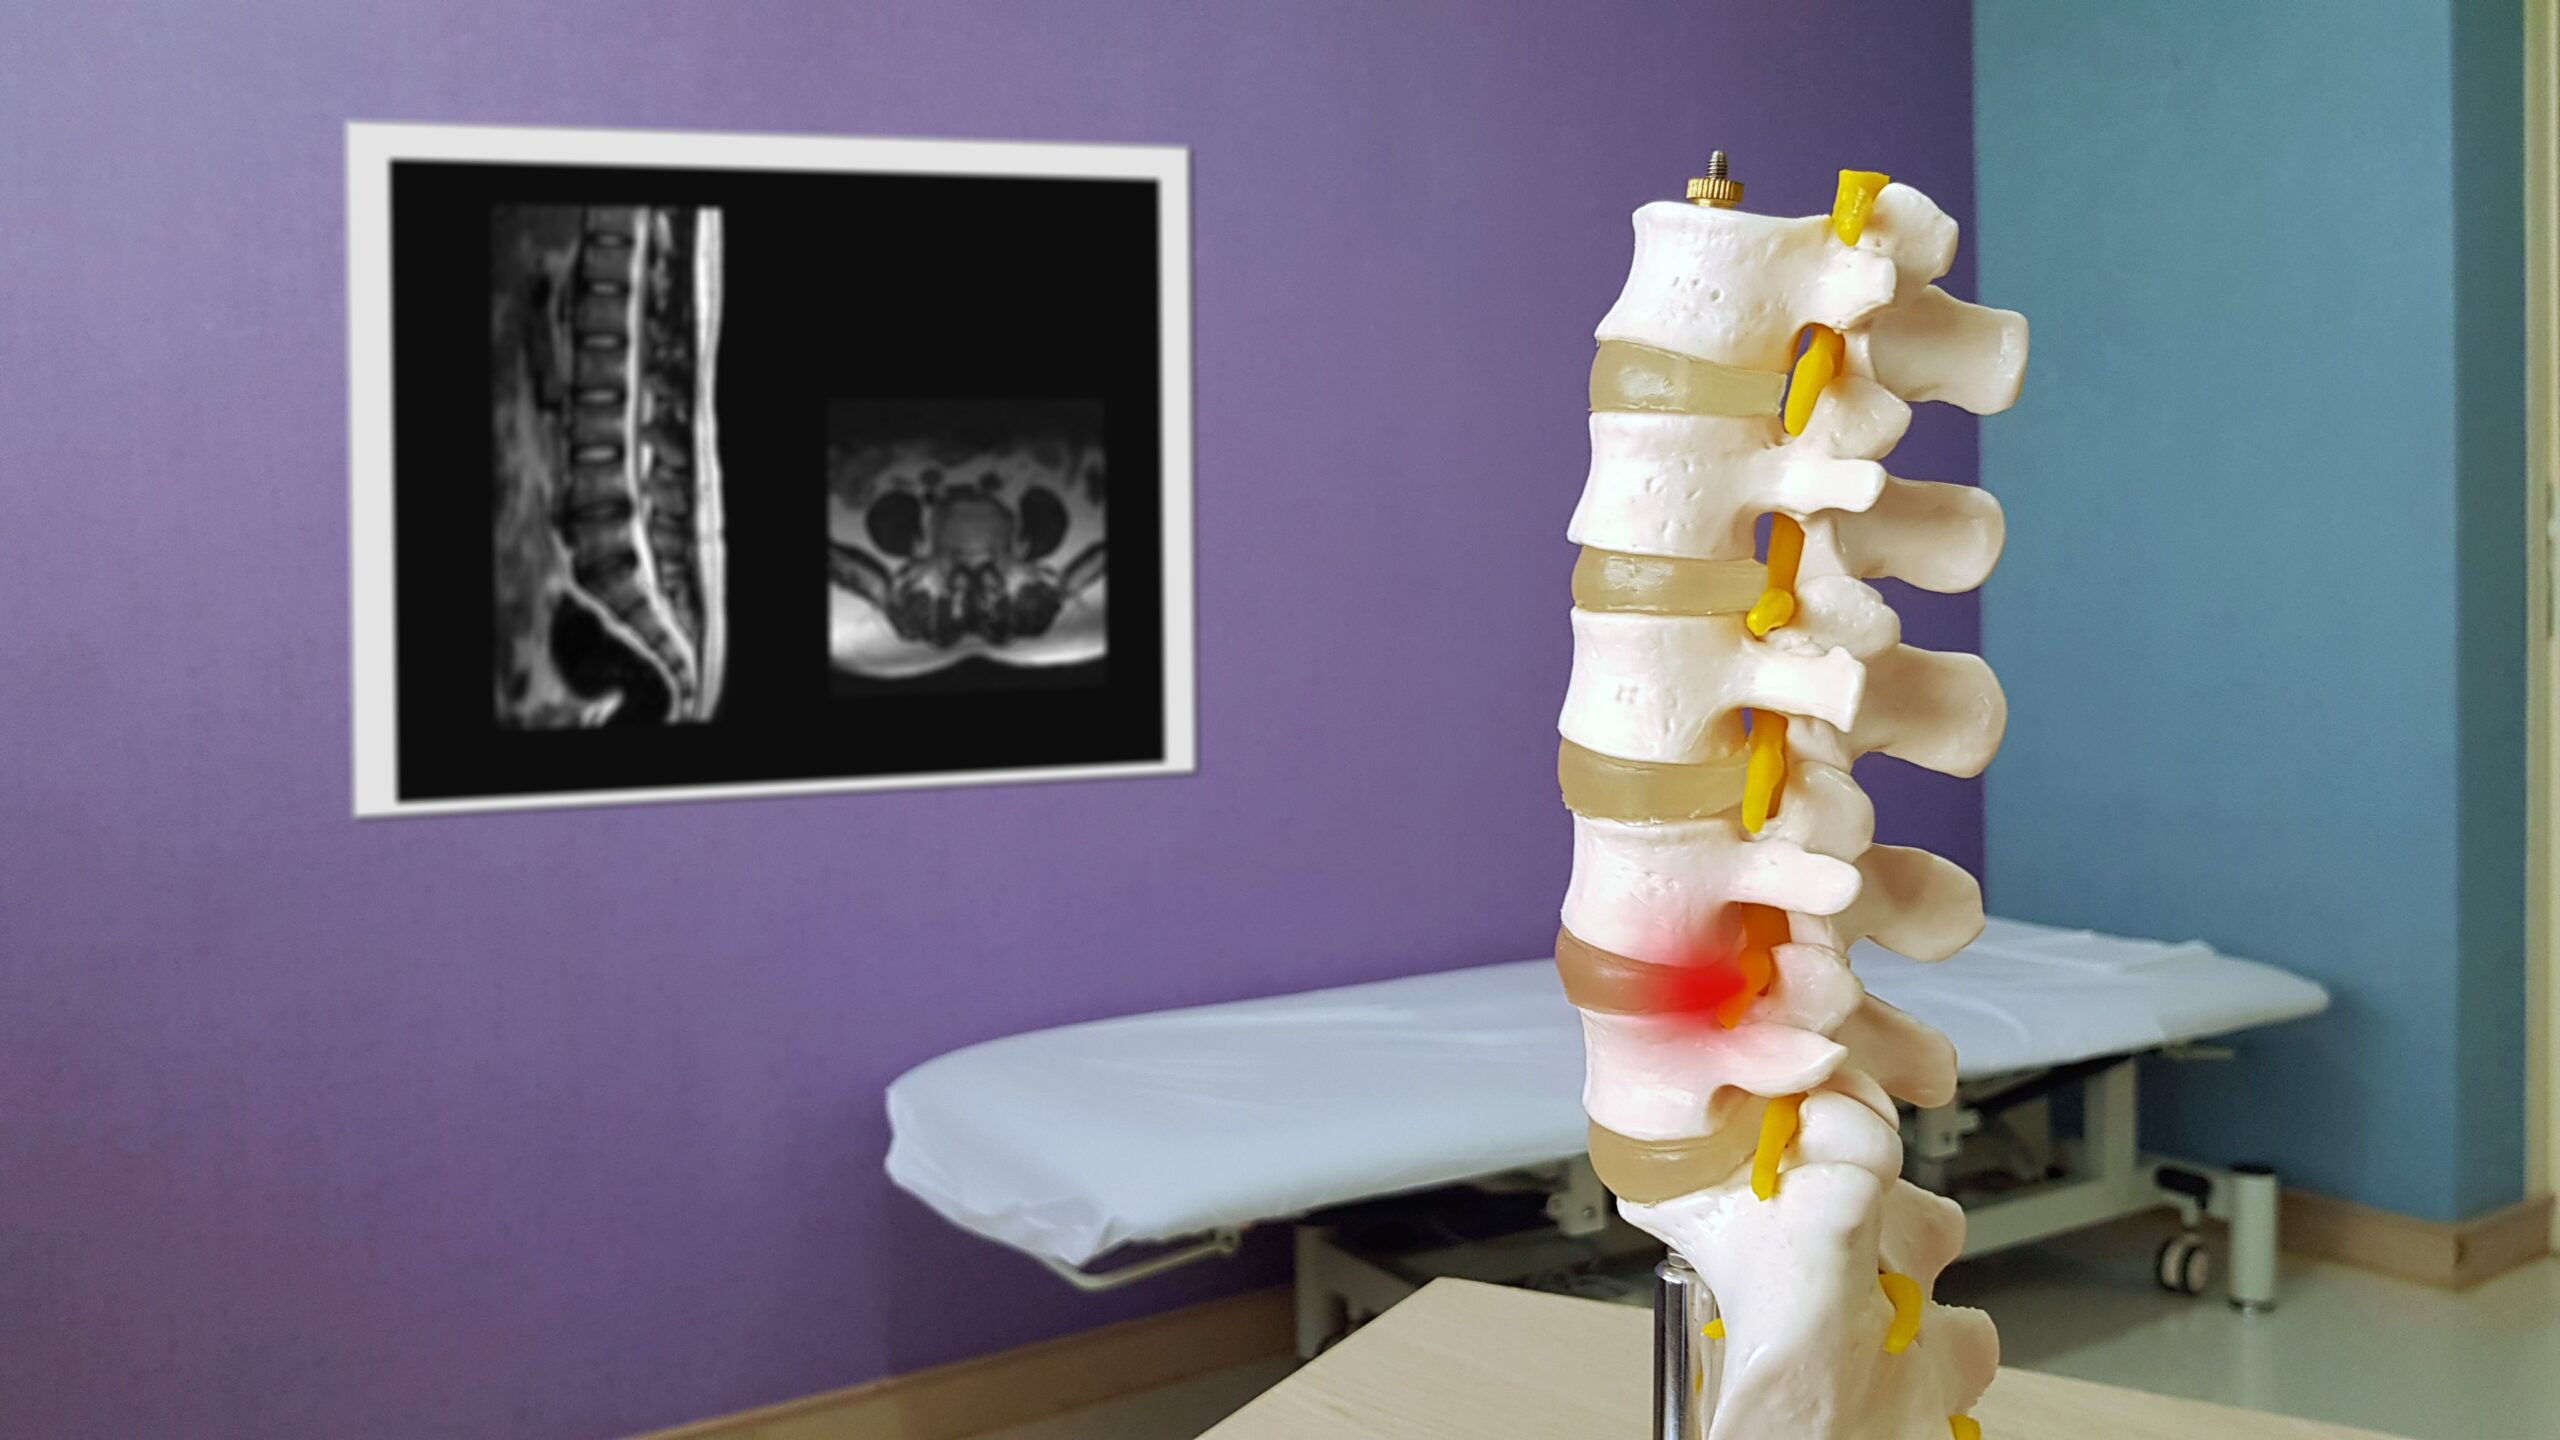 Lumbar spine model show spinal canal stenosis and nerve compression from disc displacement or Herniated disc disease(HNP) with MRI. Medical neurology diagnosis care and treatment technology concept.